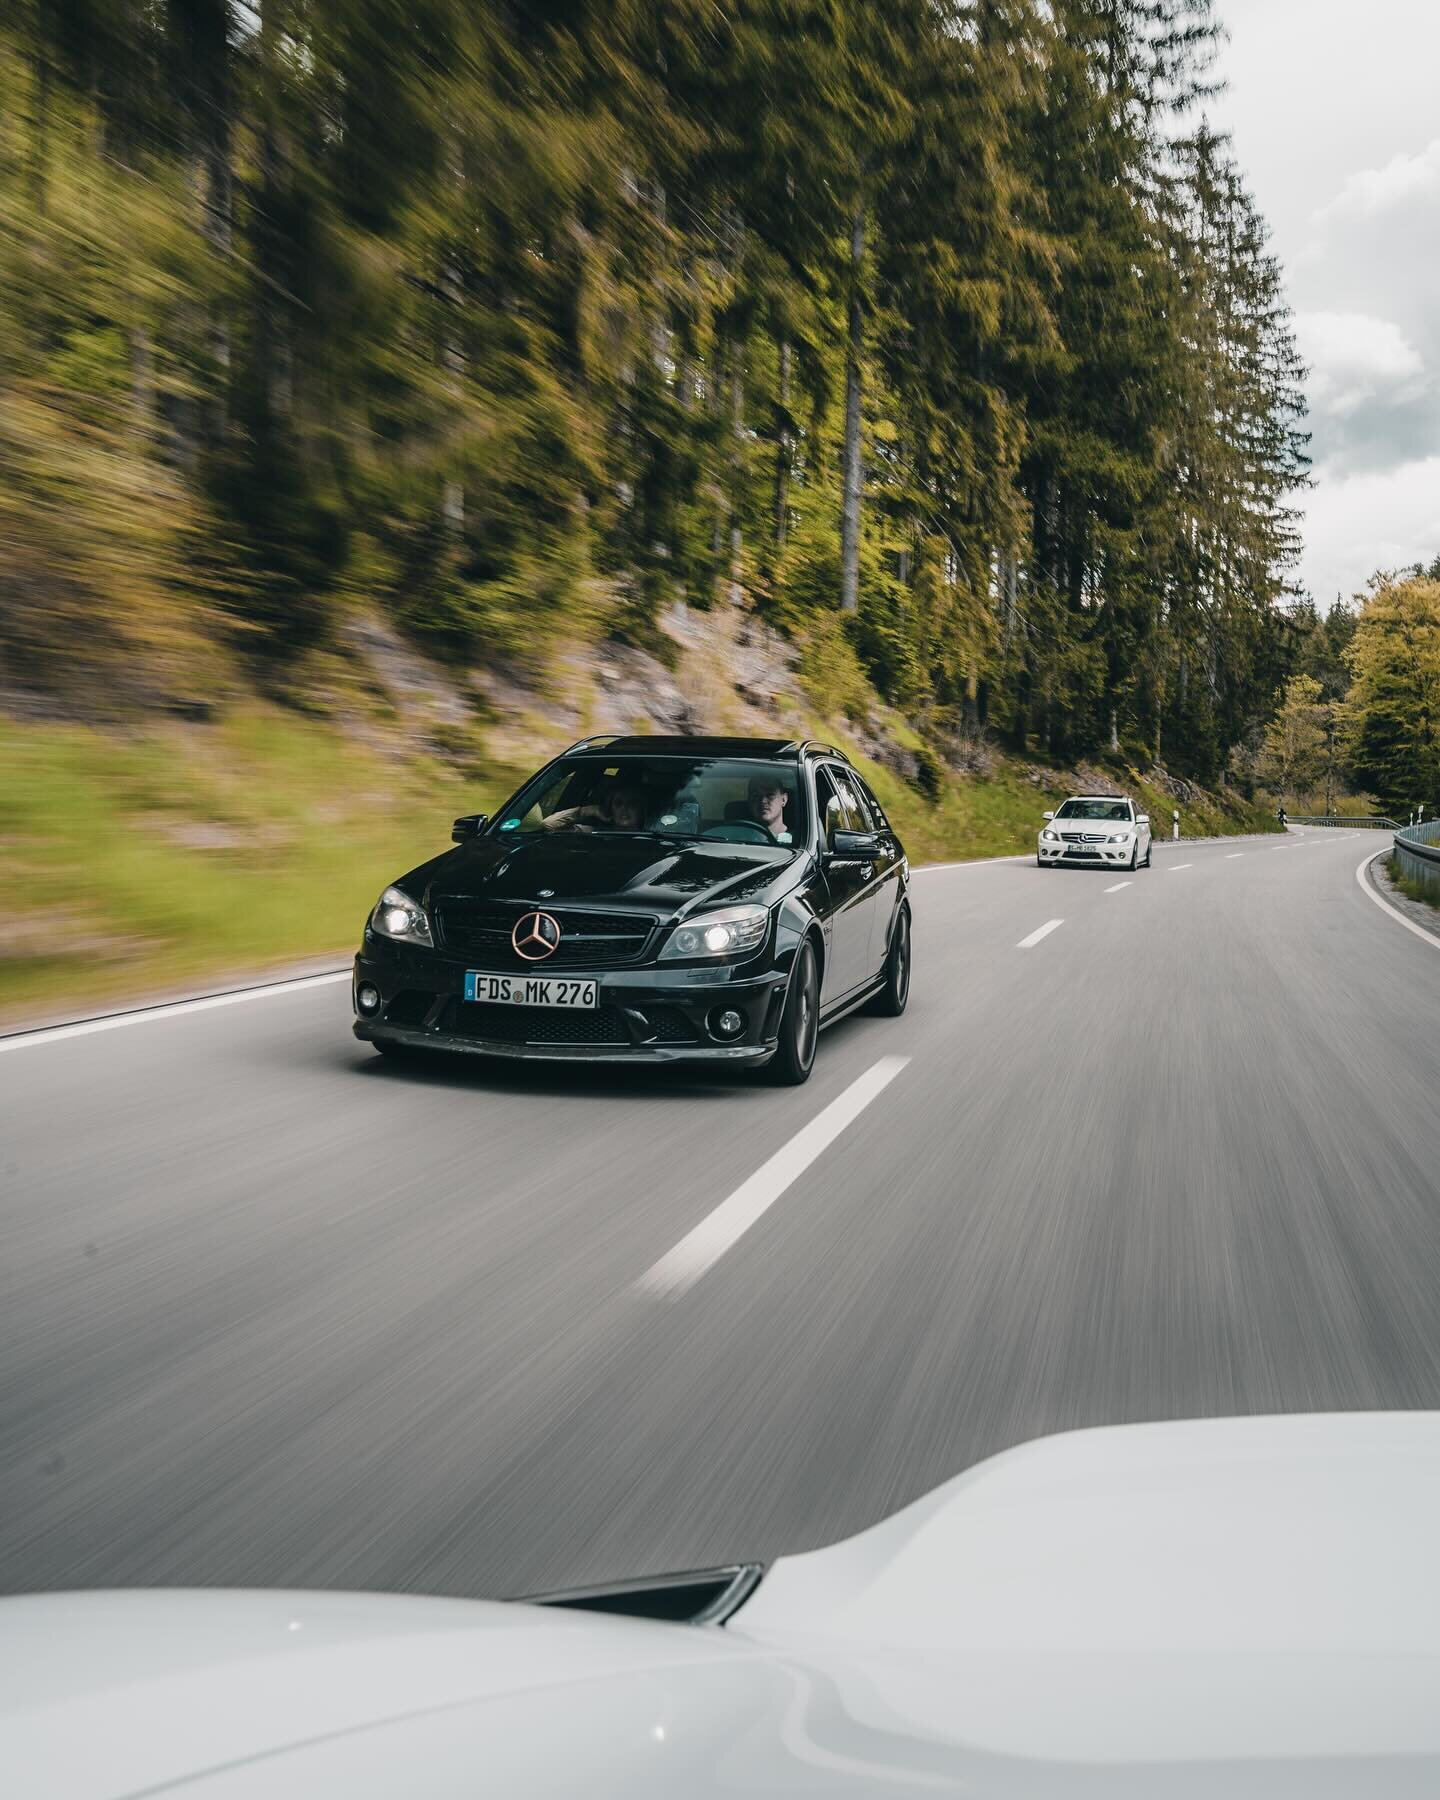 Twists and turns make a great weekend 🌲🏎️@performance.squad 

_____________________________________________________

#carporn #carphotography #mercedes #amg #c63